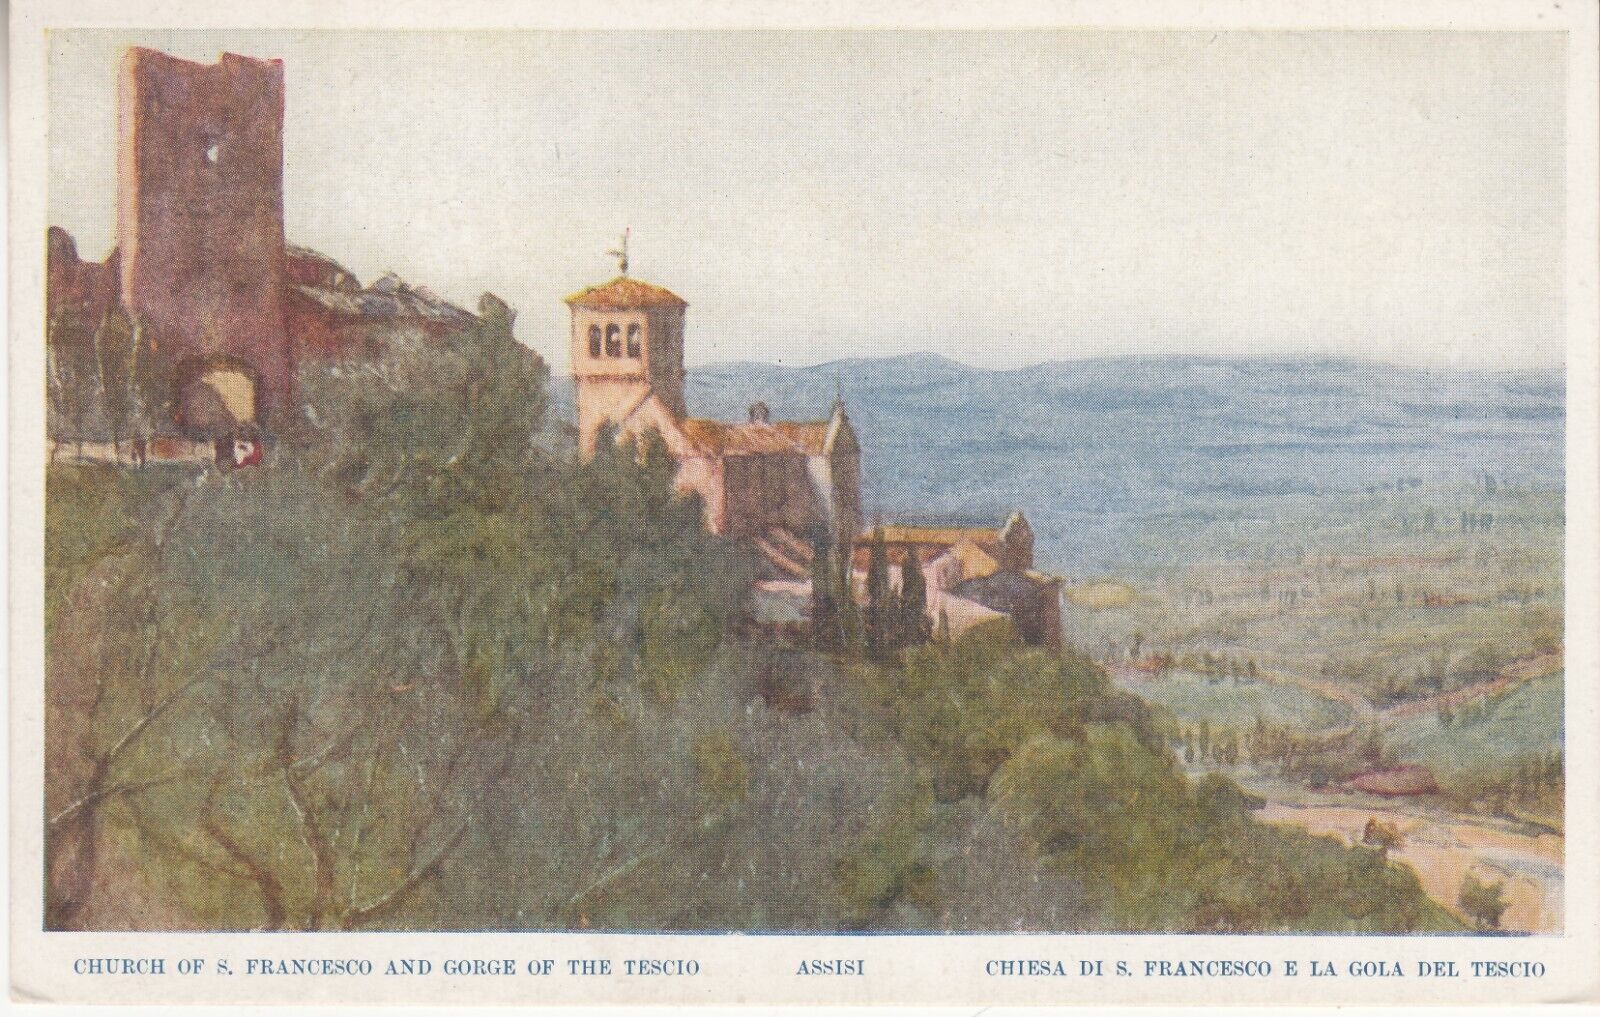 Assisi, Italy. Church of St. Francis and Gorge of the Tescio. # 528 Francesco